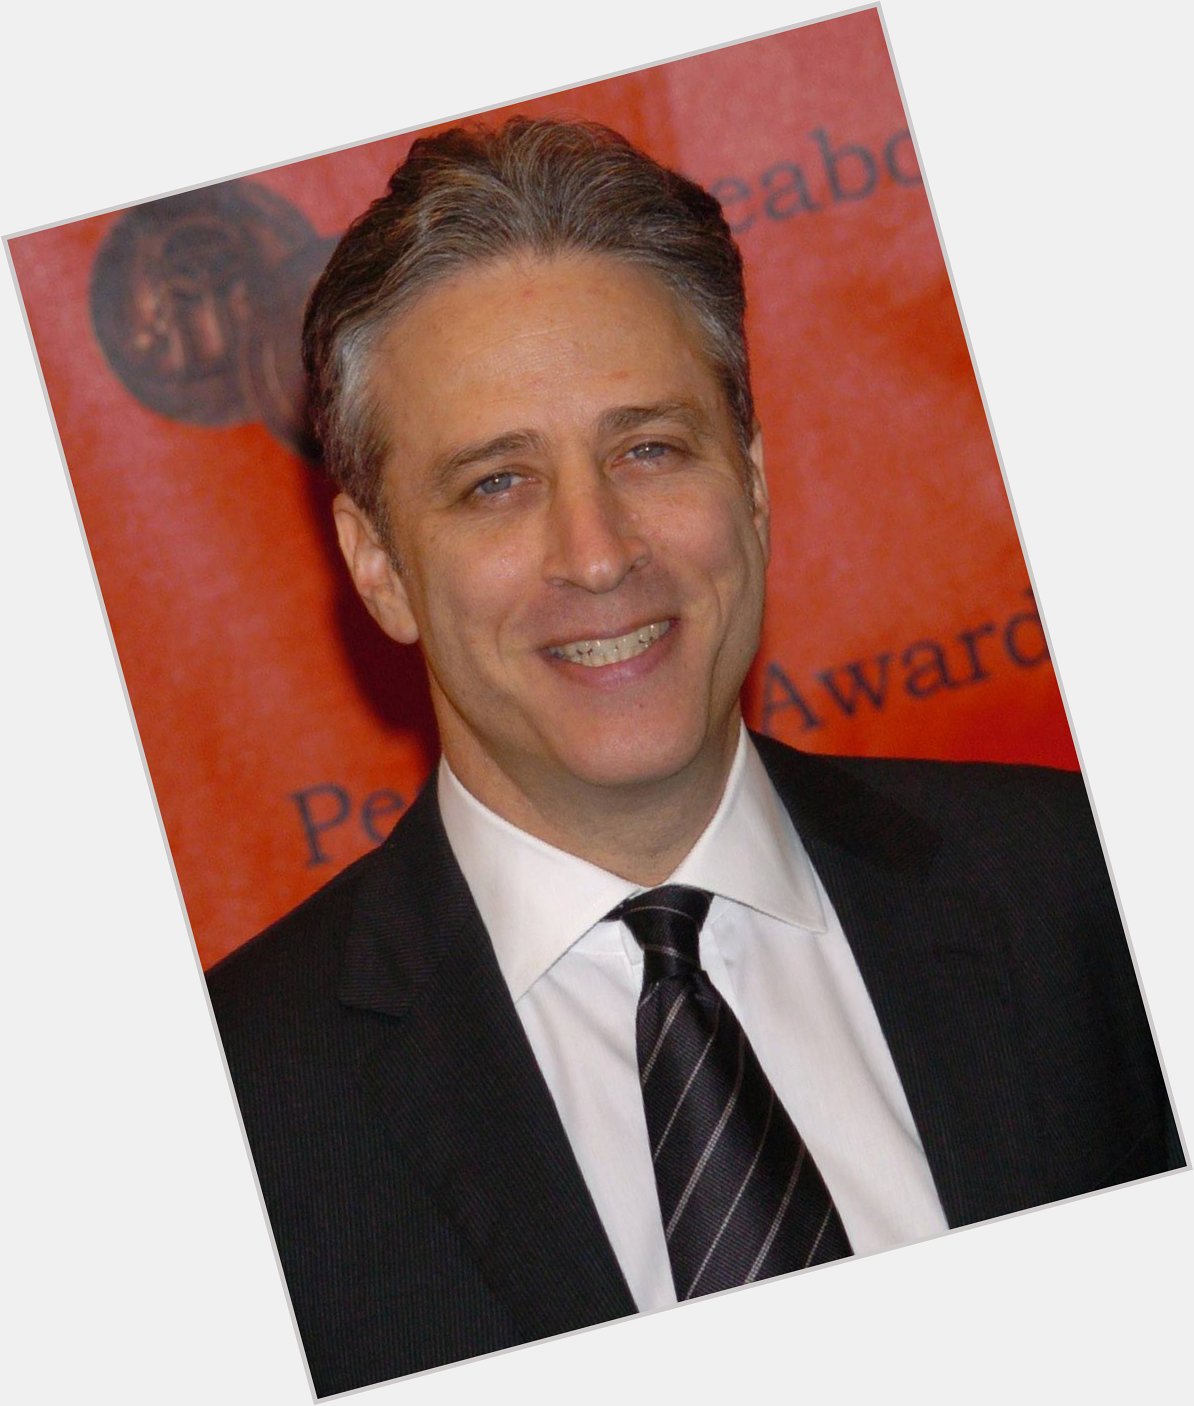 \"The Internet is just a world passing around notes in a classroom.\"
Happy birthday Jon Stewart! 